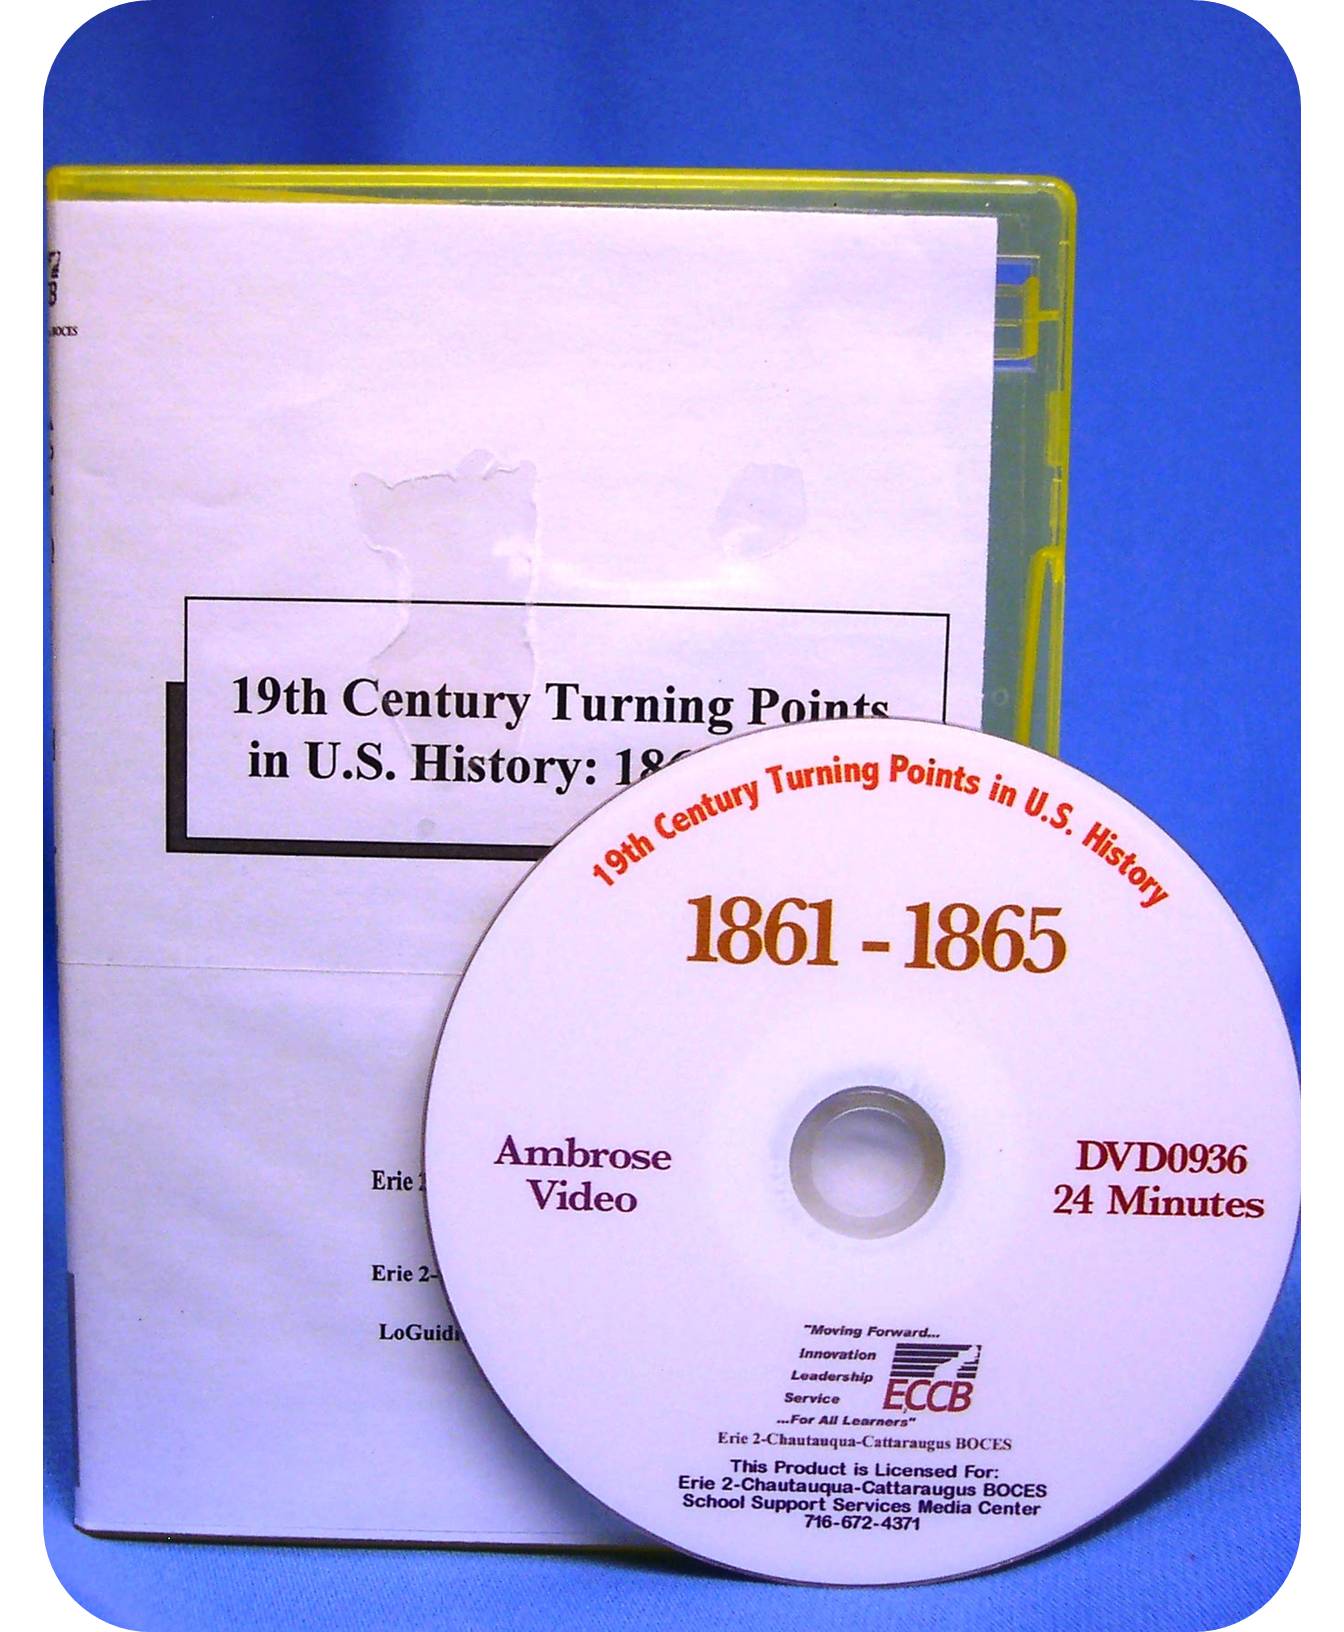 19th Century Turning Points in U.S. History: 1861 - 1865